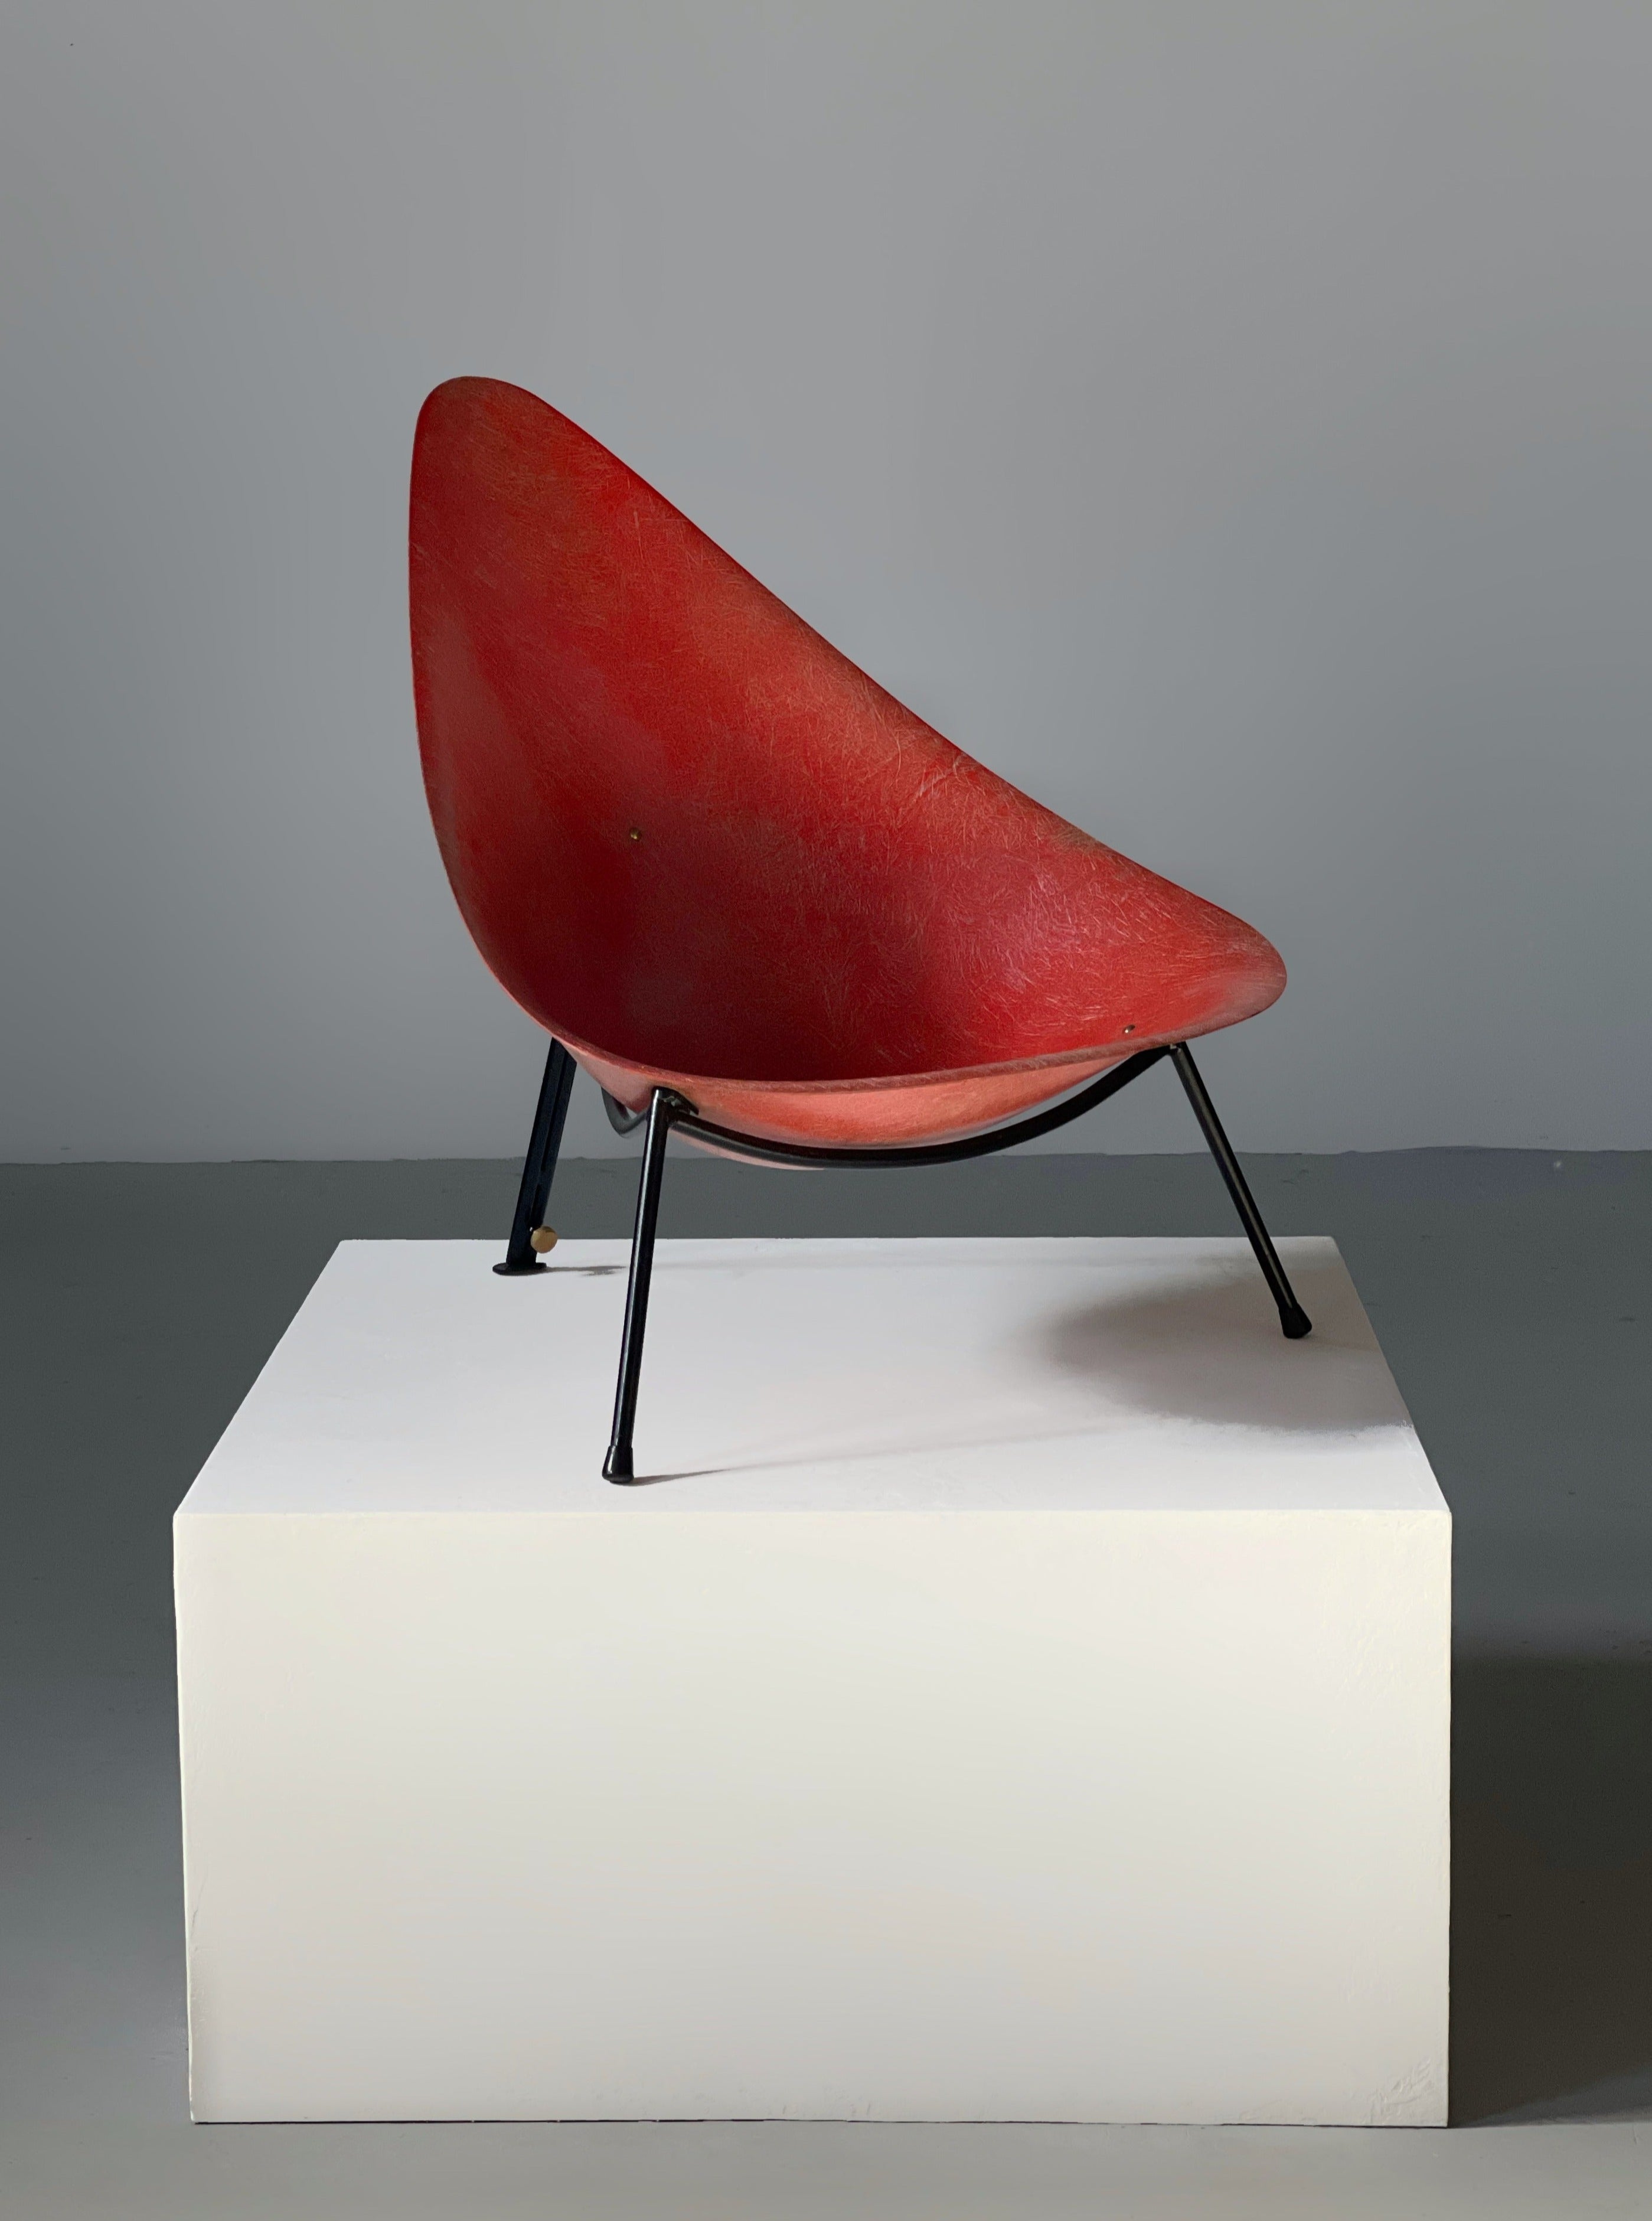 Early French Fiberglass Lounge Chair in red for Ed Merat 1956